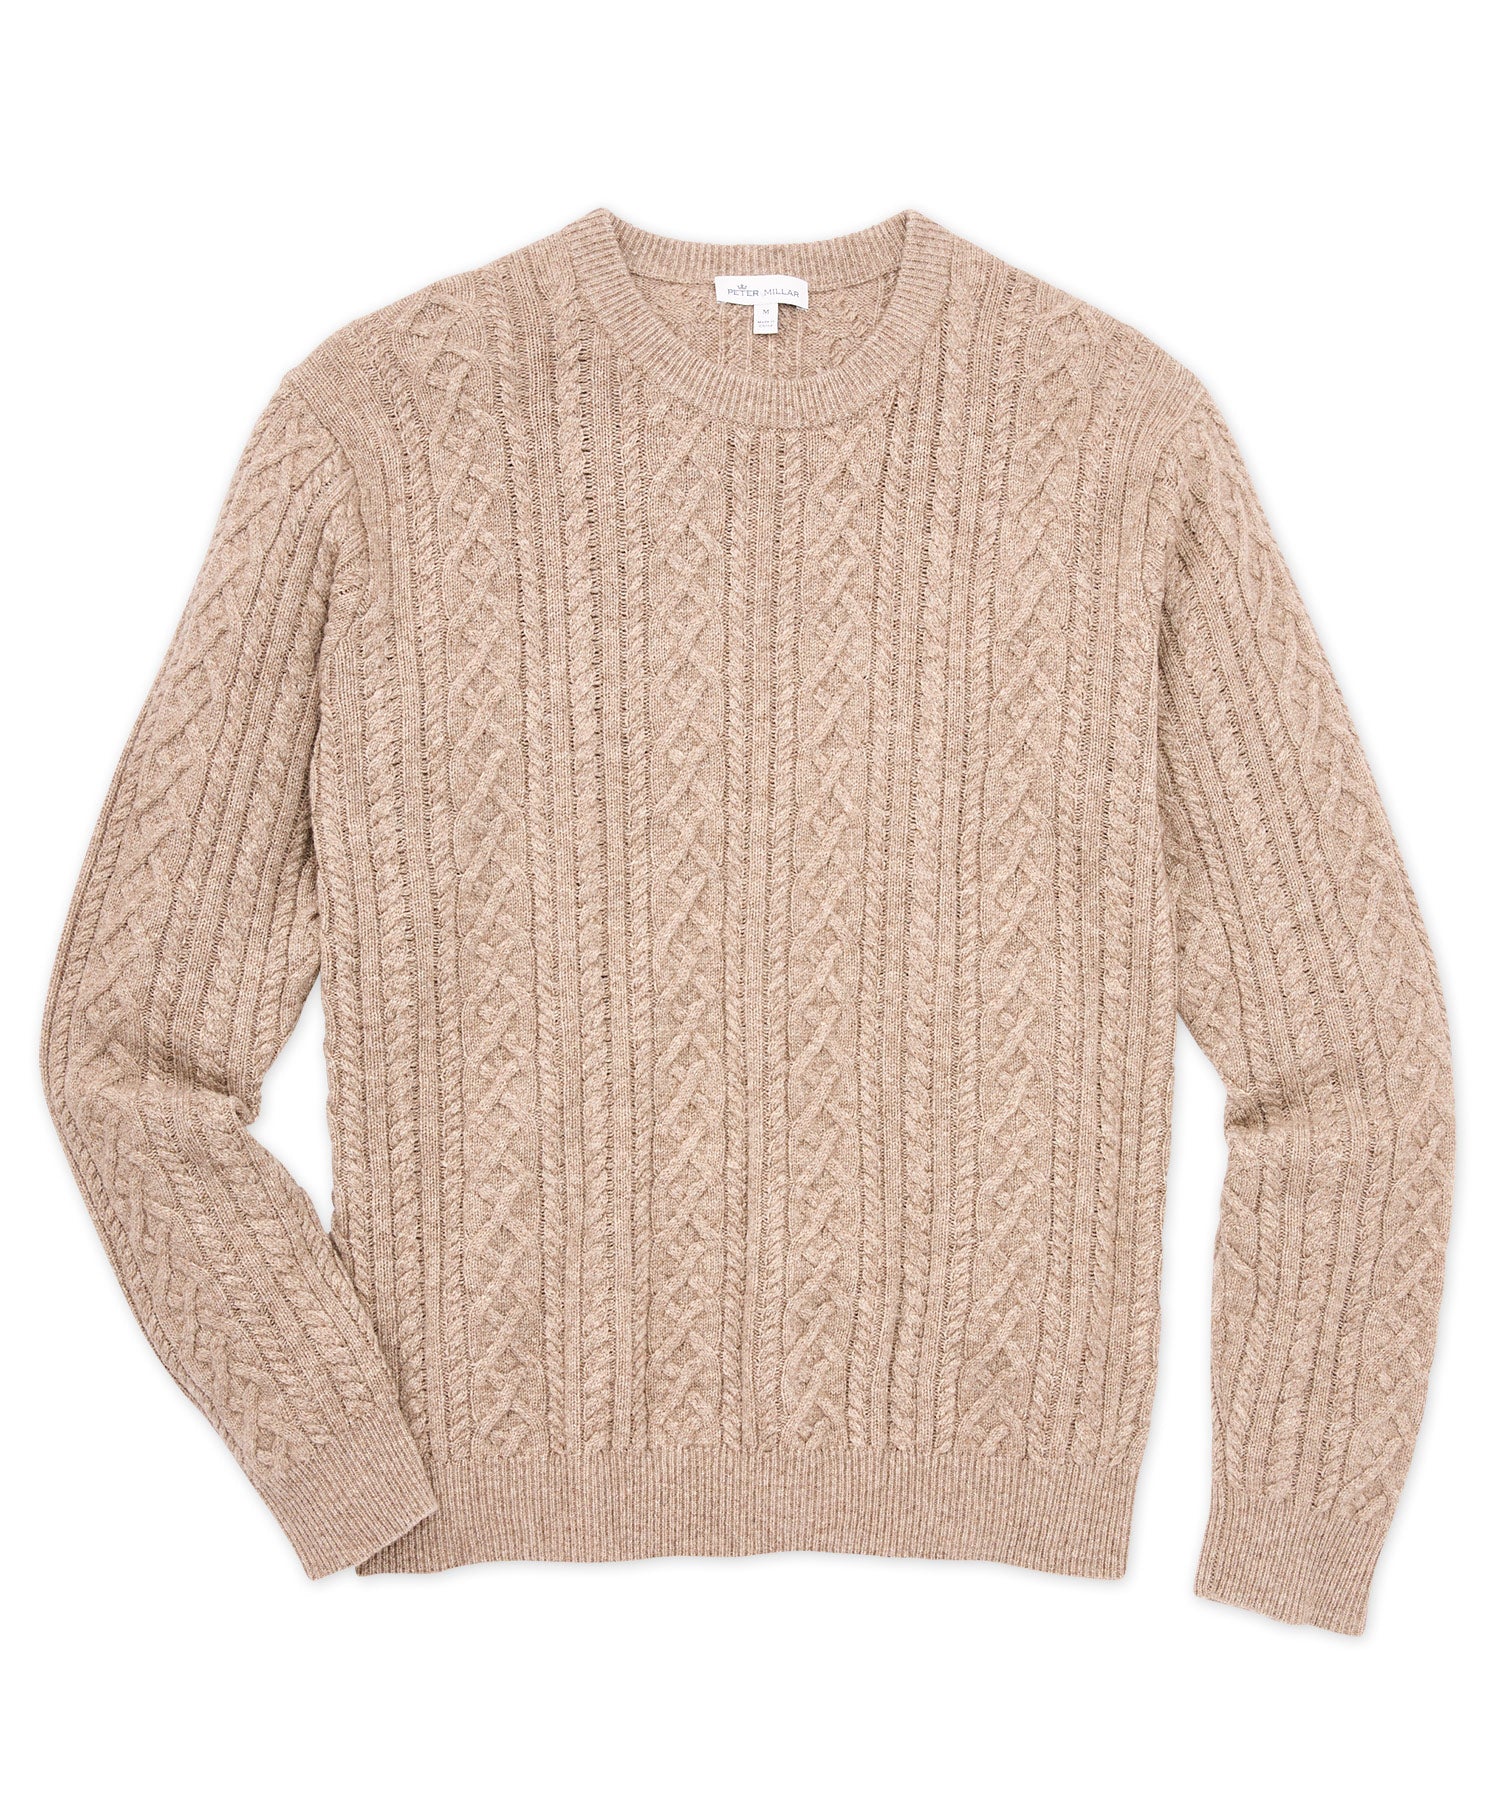 Peter Millar Wool Blend Cable Crew